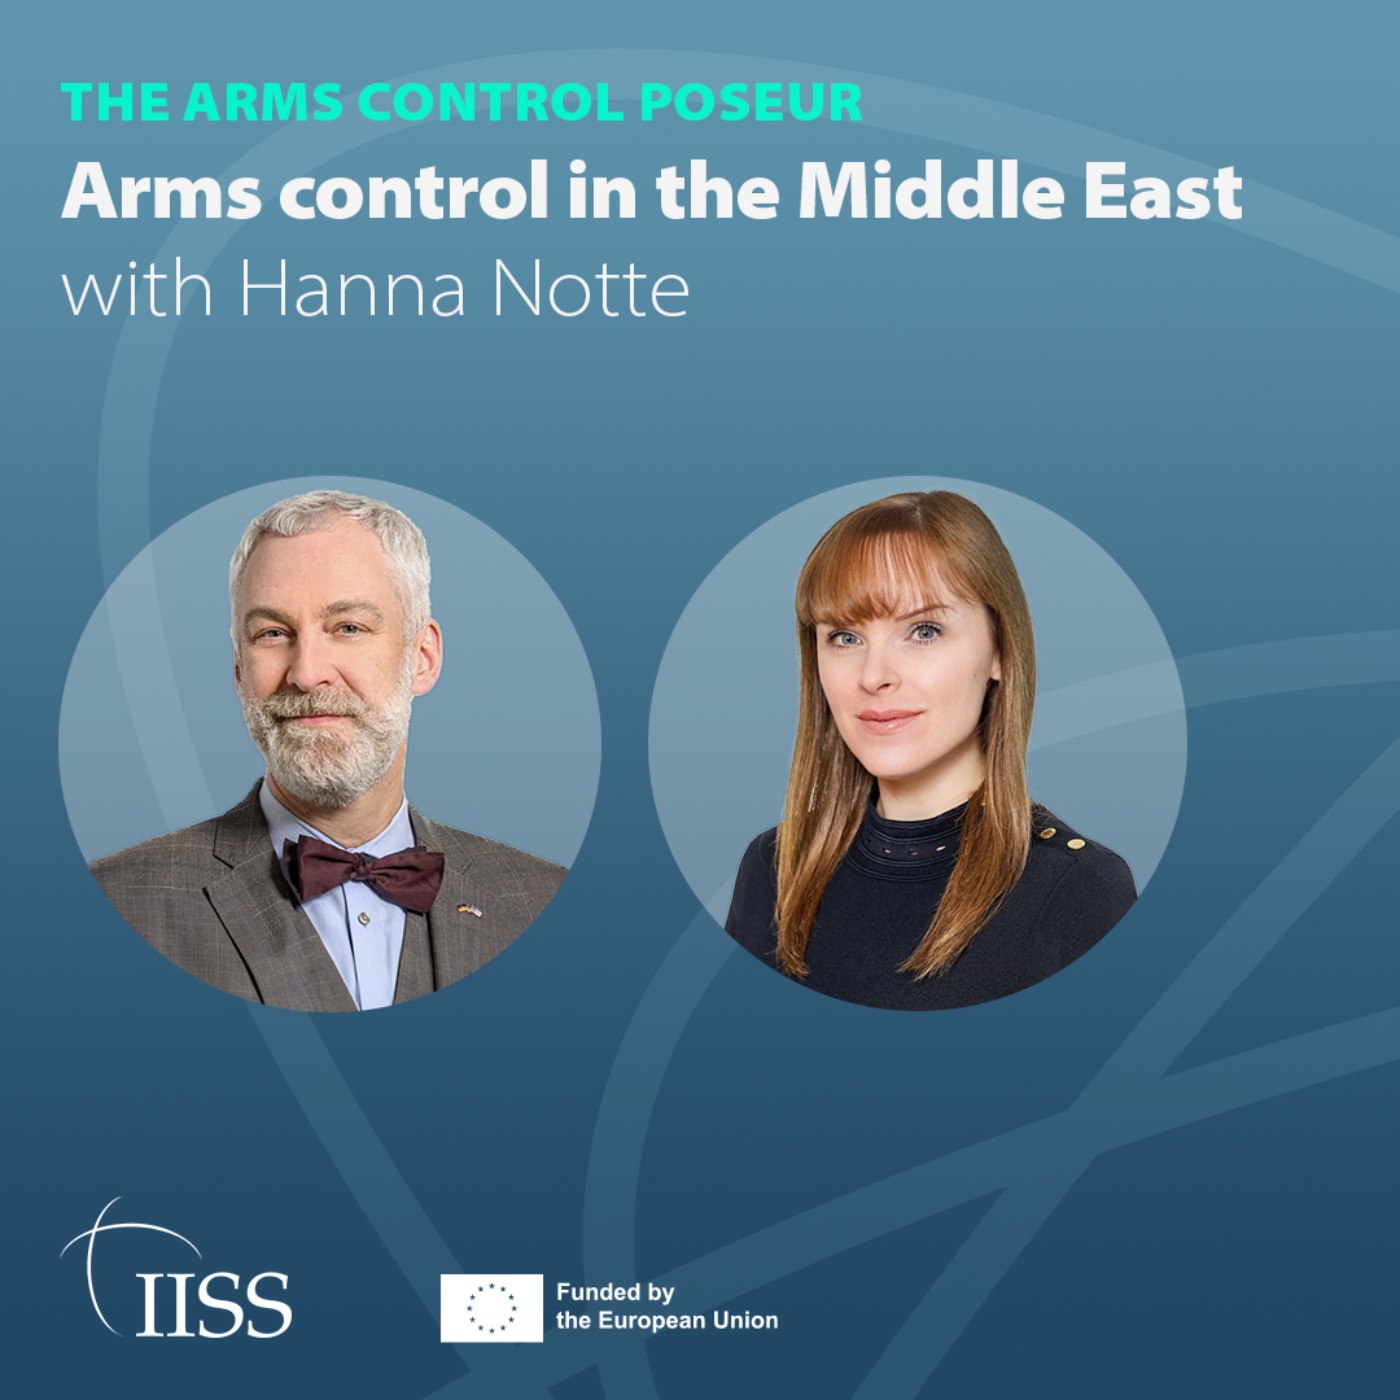 Arms control in the Middle East with Hanna Notte